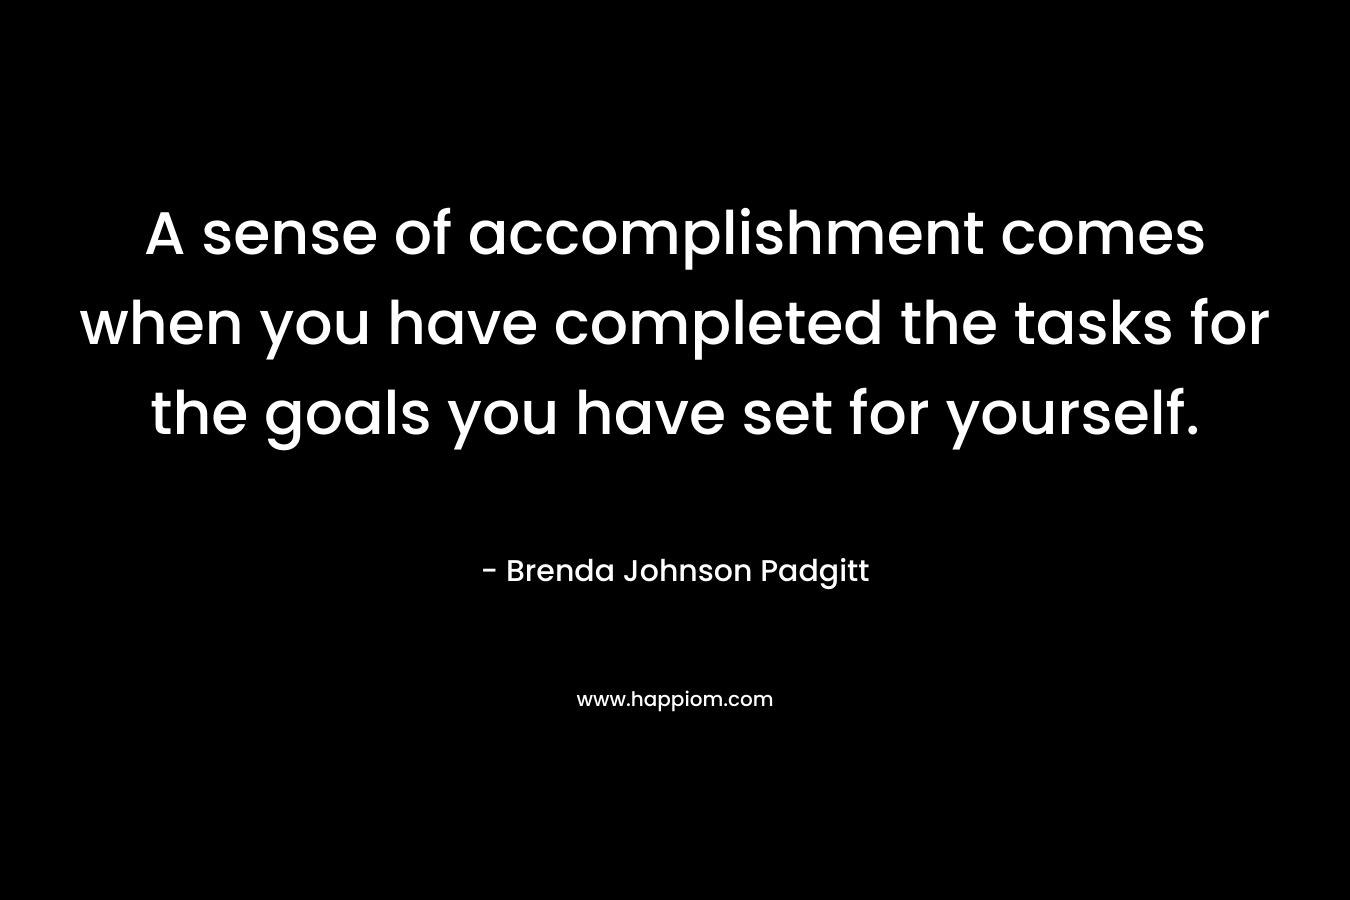 A sense of accomplishment comes when you have completed the tasks for the goals you have set for yourself.